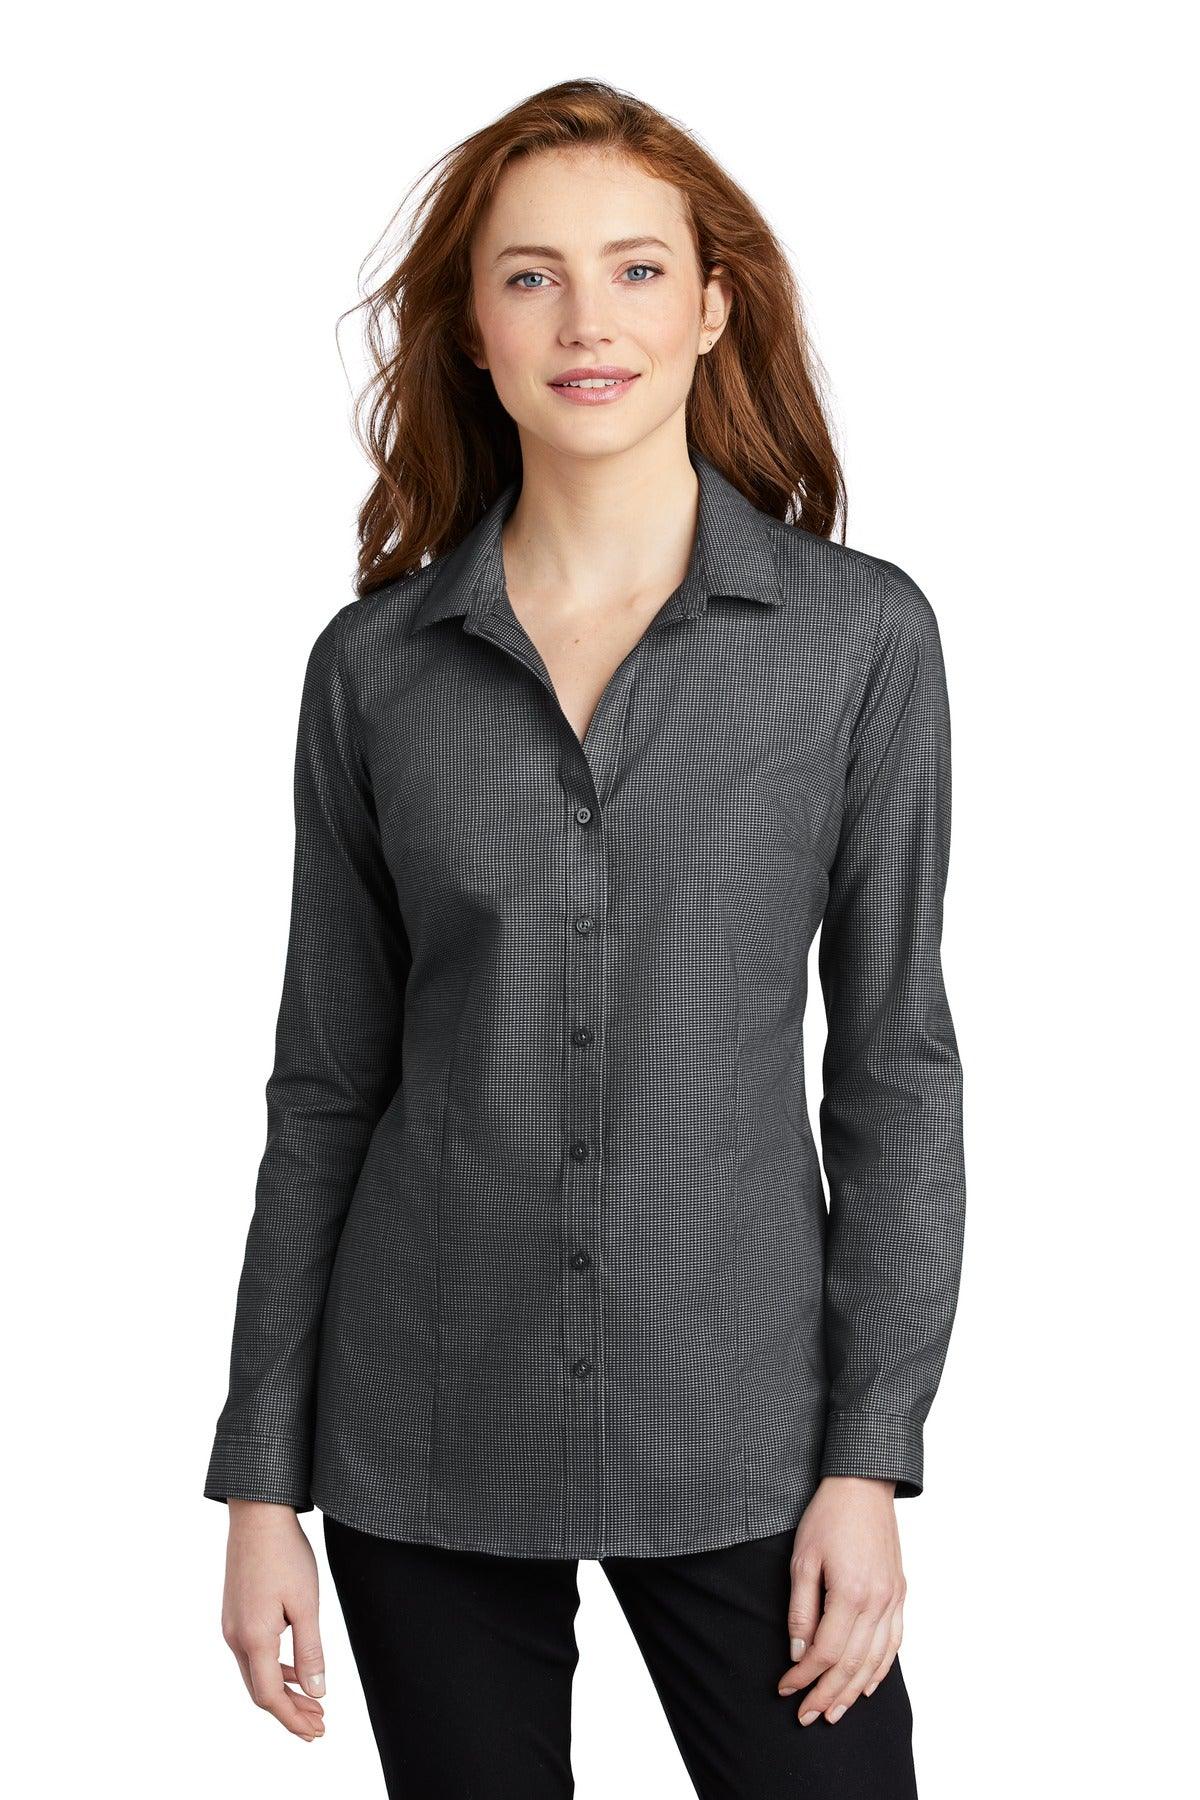 Port Authority Ladies Pincheck Easy Care Shirt LW645 - Dresses Max